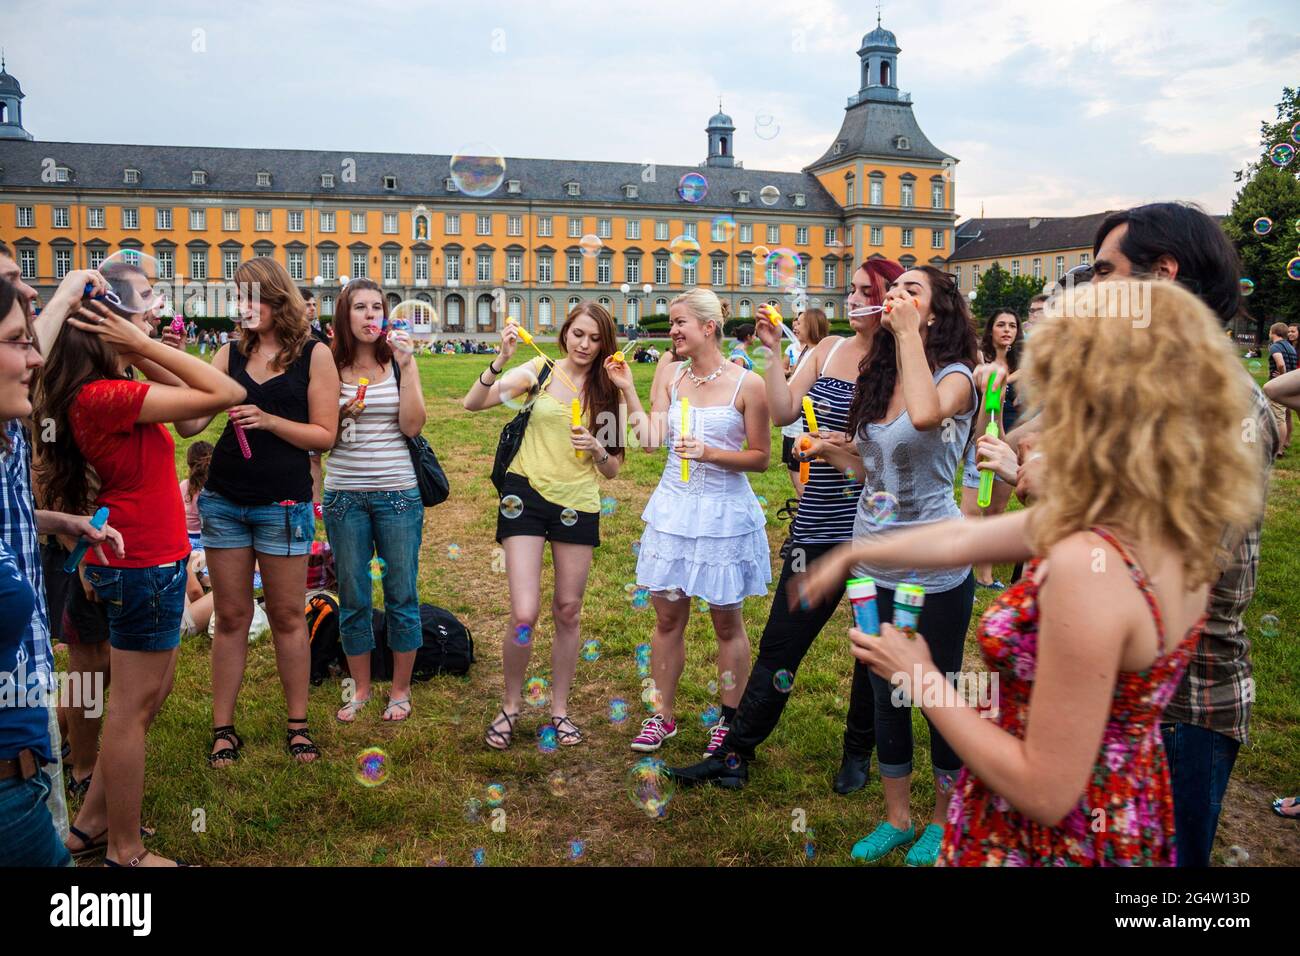 BONN, GERMANY - JULY 22: Students of University in Bonn blow bubbles in front of main building of University on July 22, 2013 in Bonn, Germany. Univer Stock Photo